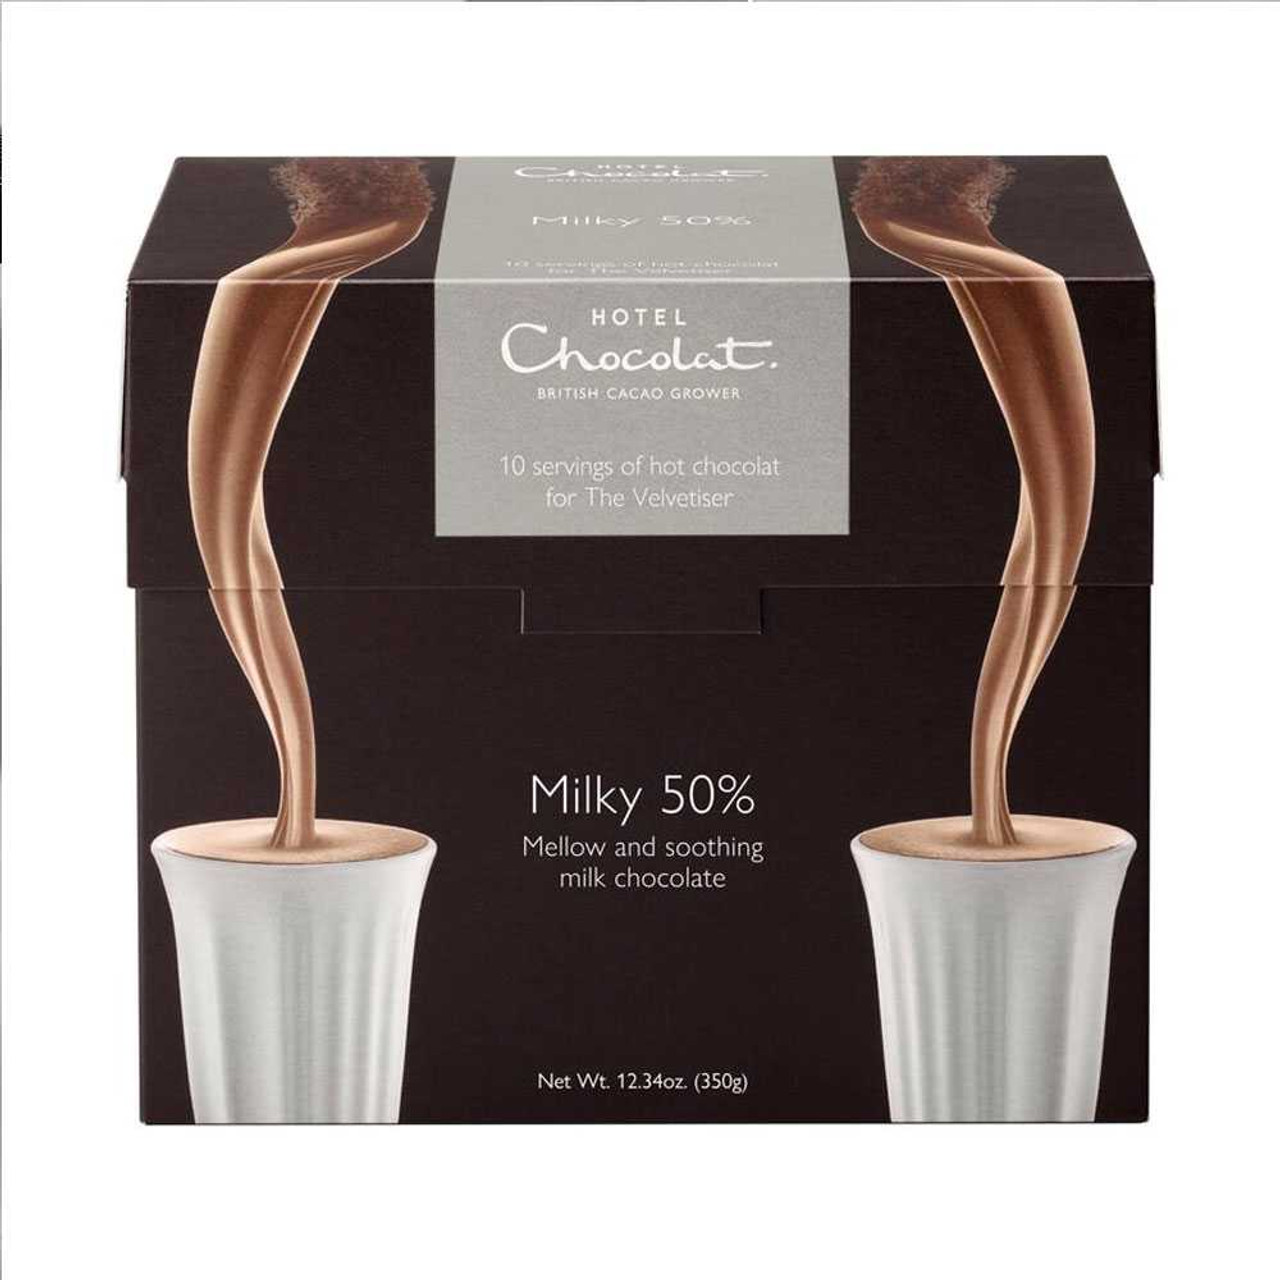 https://cdn11.bigcommerce.com/s-djdkawdsag/images/stencil/1280x1280/products/1003/3584/Hotel-Chocolat-Velvetiser-Hot-Chocolate-Maker-Complete-Starter-Kit-Copper-Cups-and-Mugs-Frabco-Direct_2747__10426.1653574564.jpg?c=1&imbypass=on